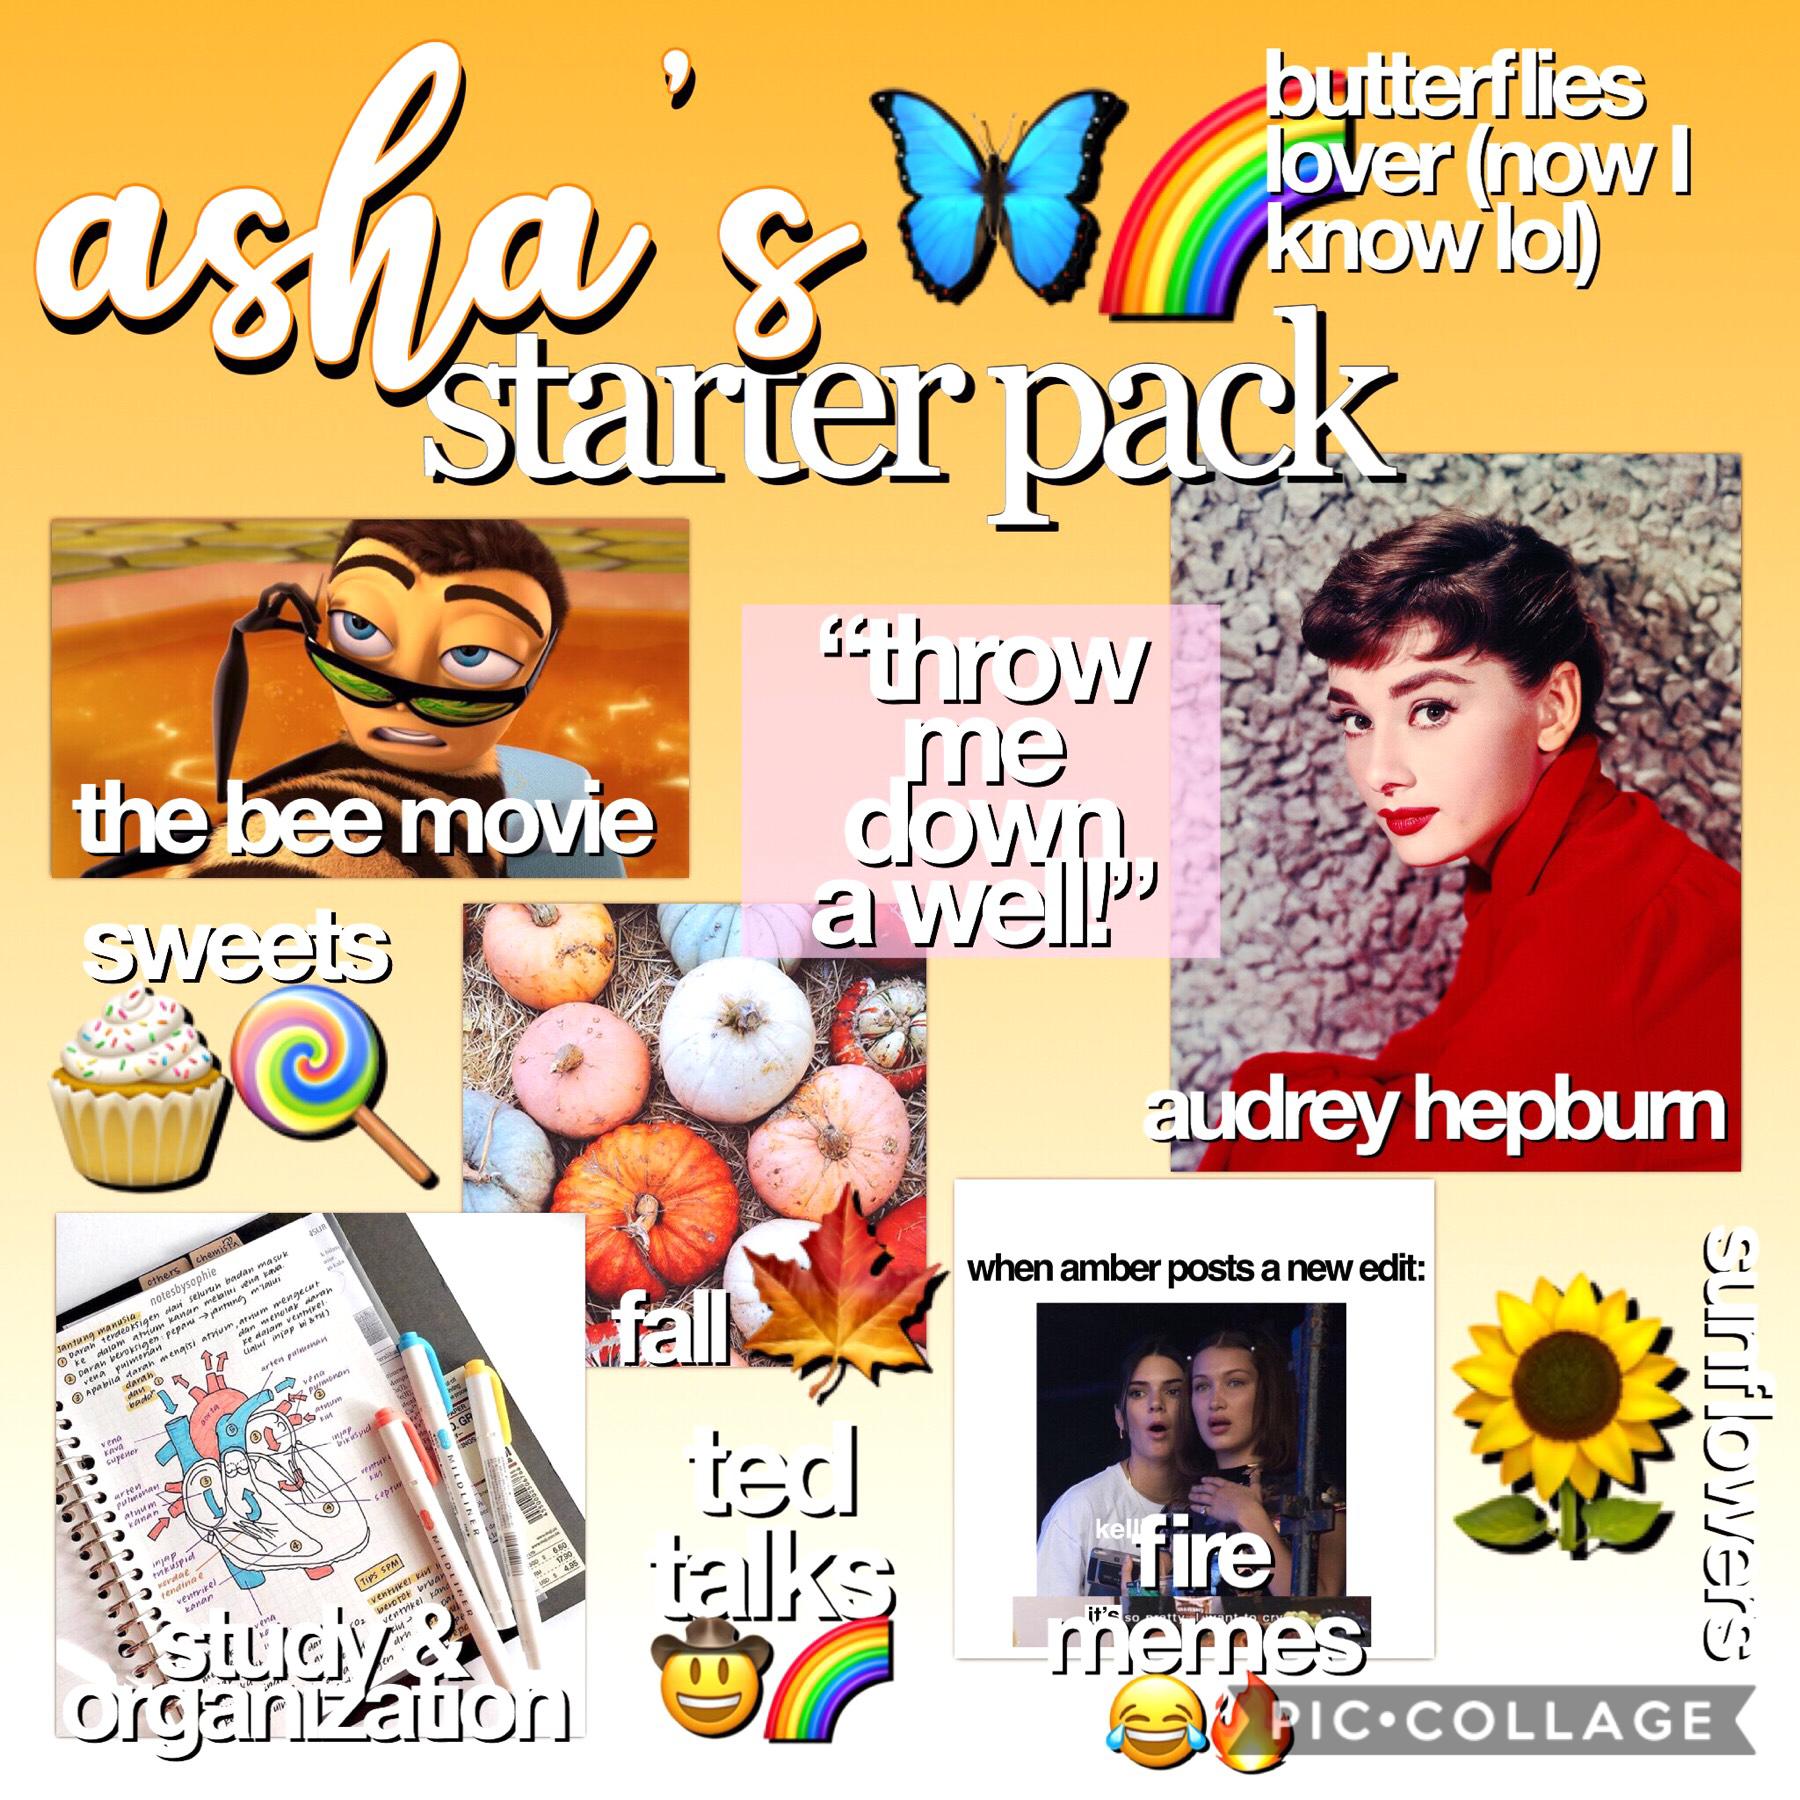 my best friend’s starter pack 😂 if you ever wondered how to become asha, follow this list and then add some editing talent! follow her @cooperfun11